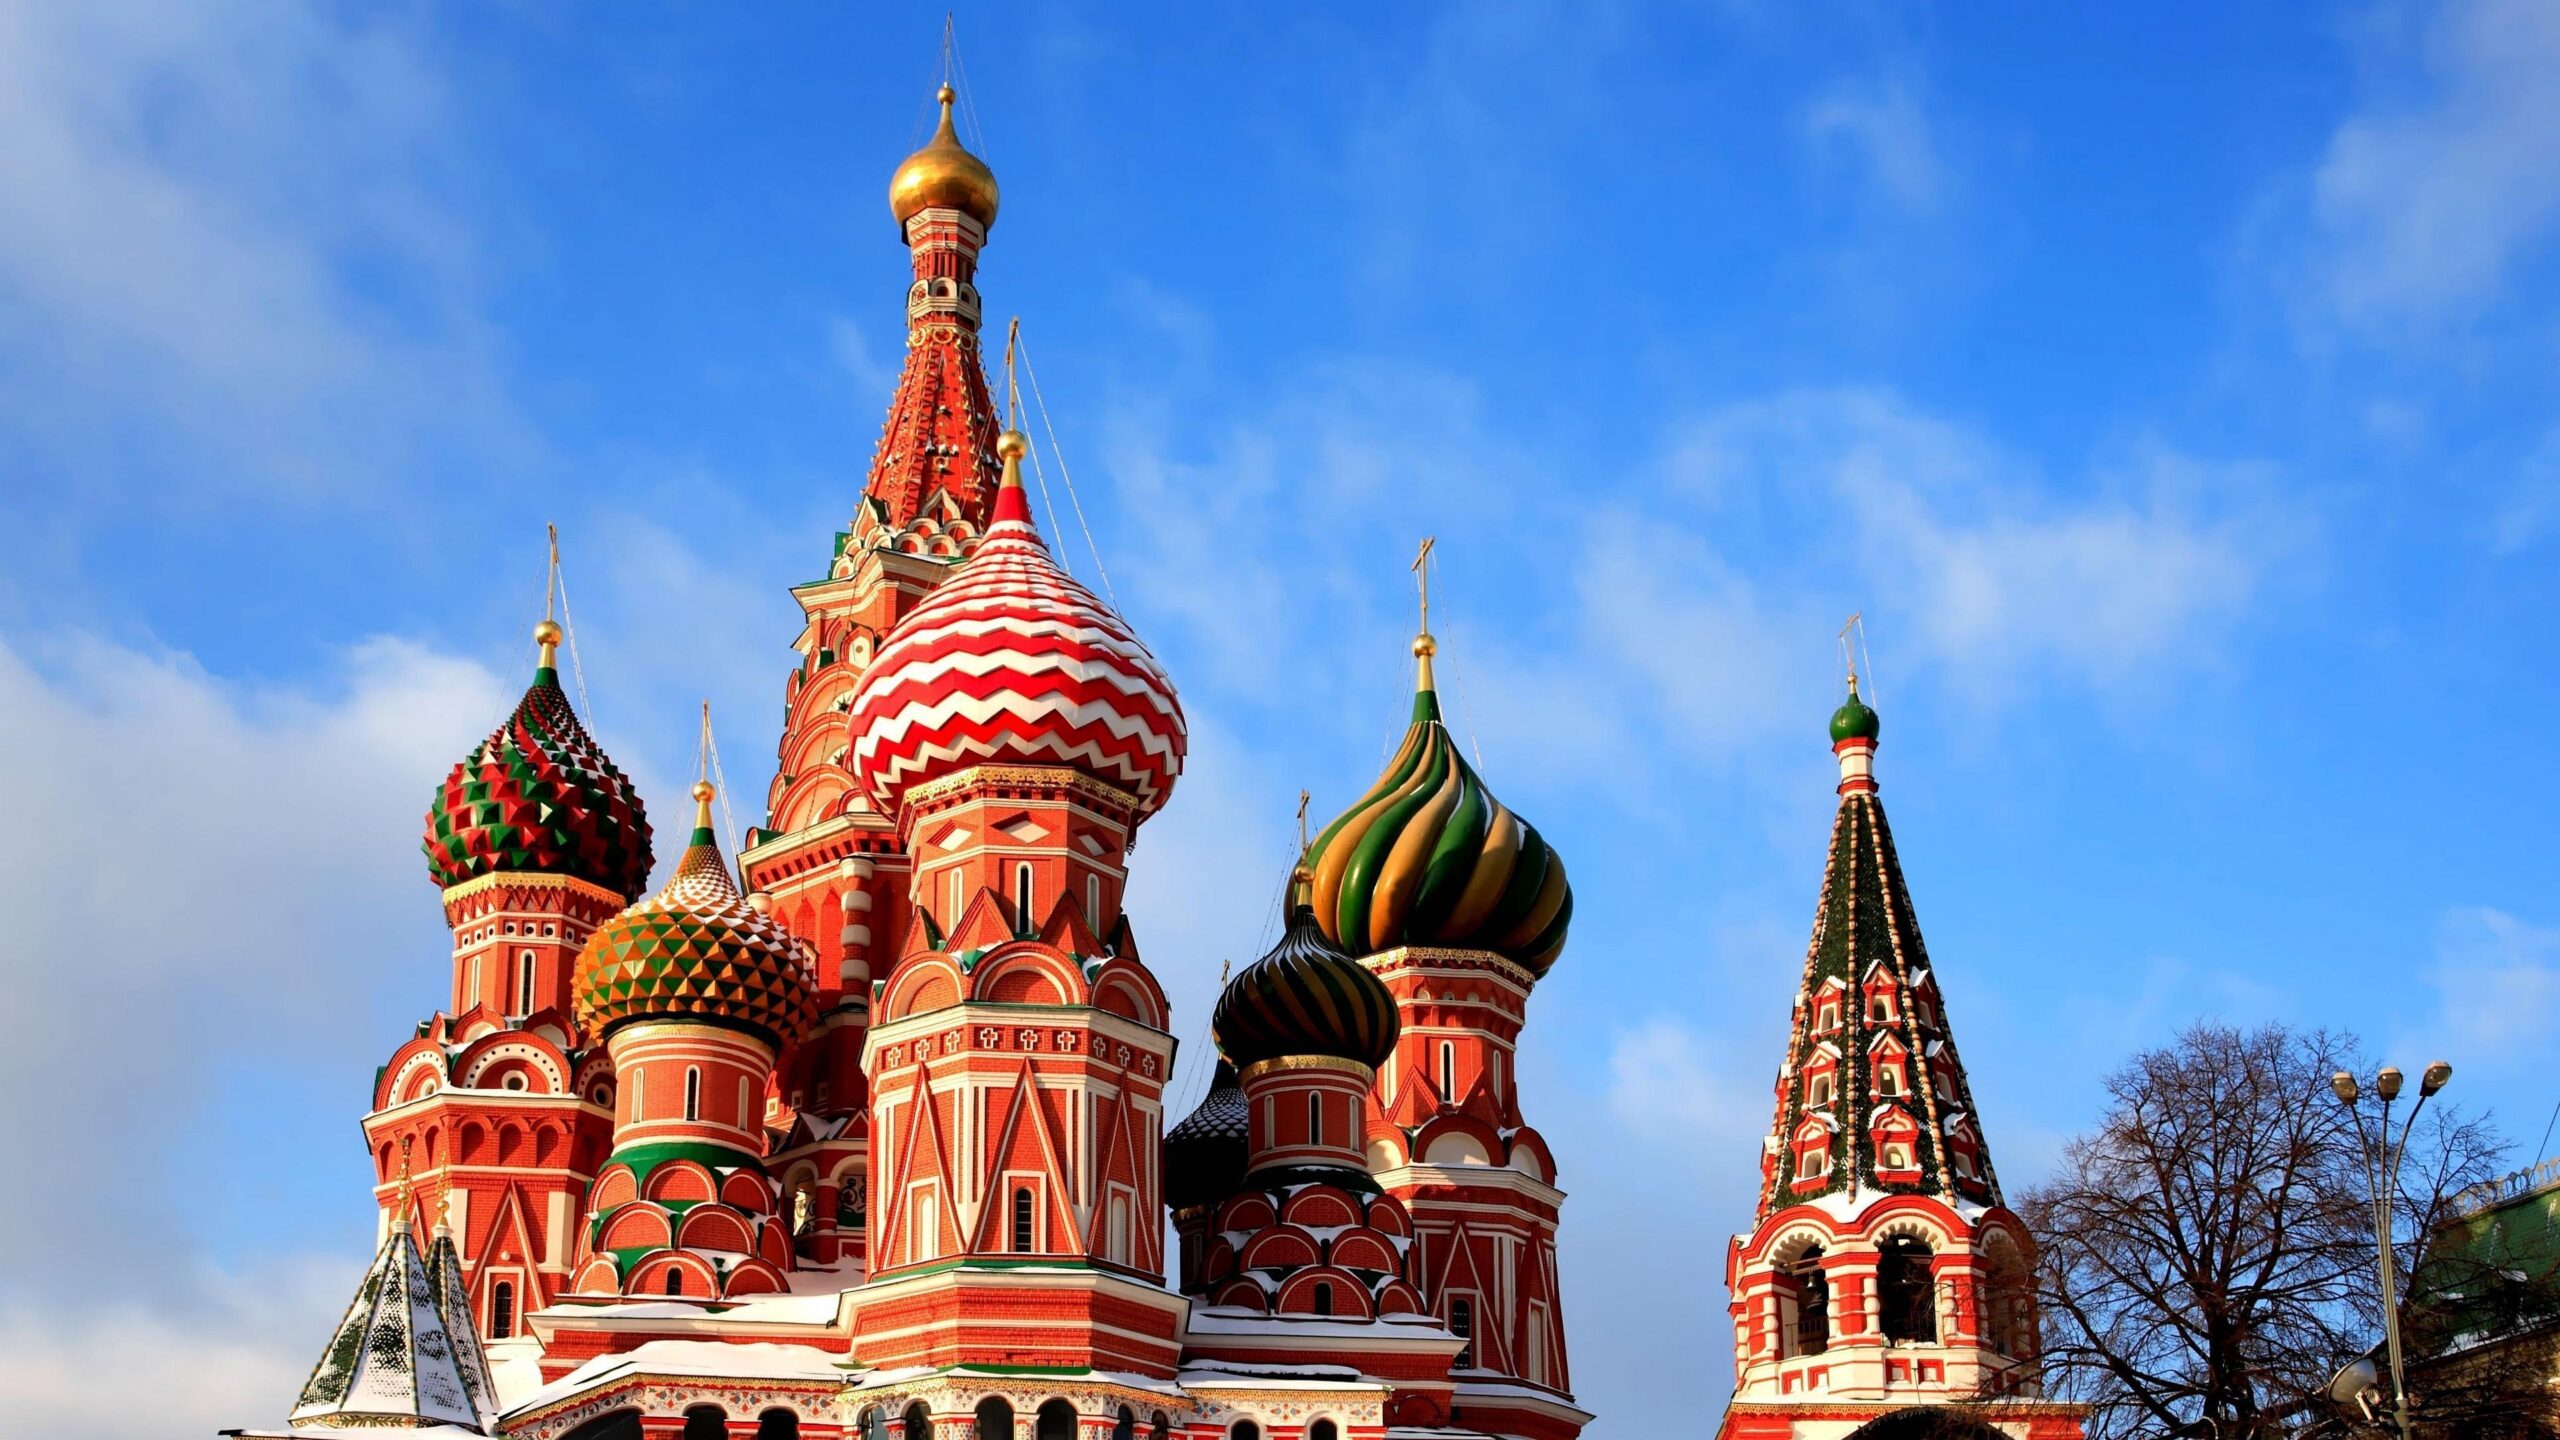 Download wallpapers st basils cathedral, red square, moscow